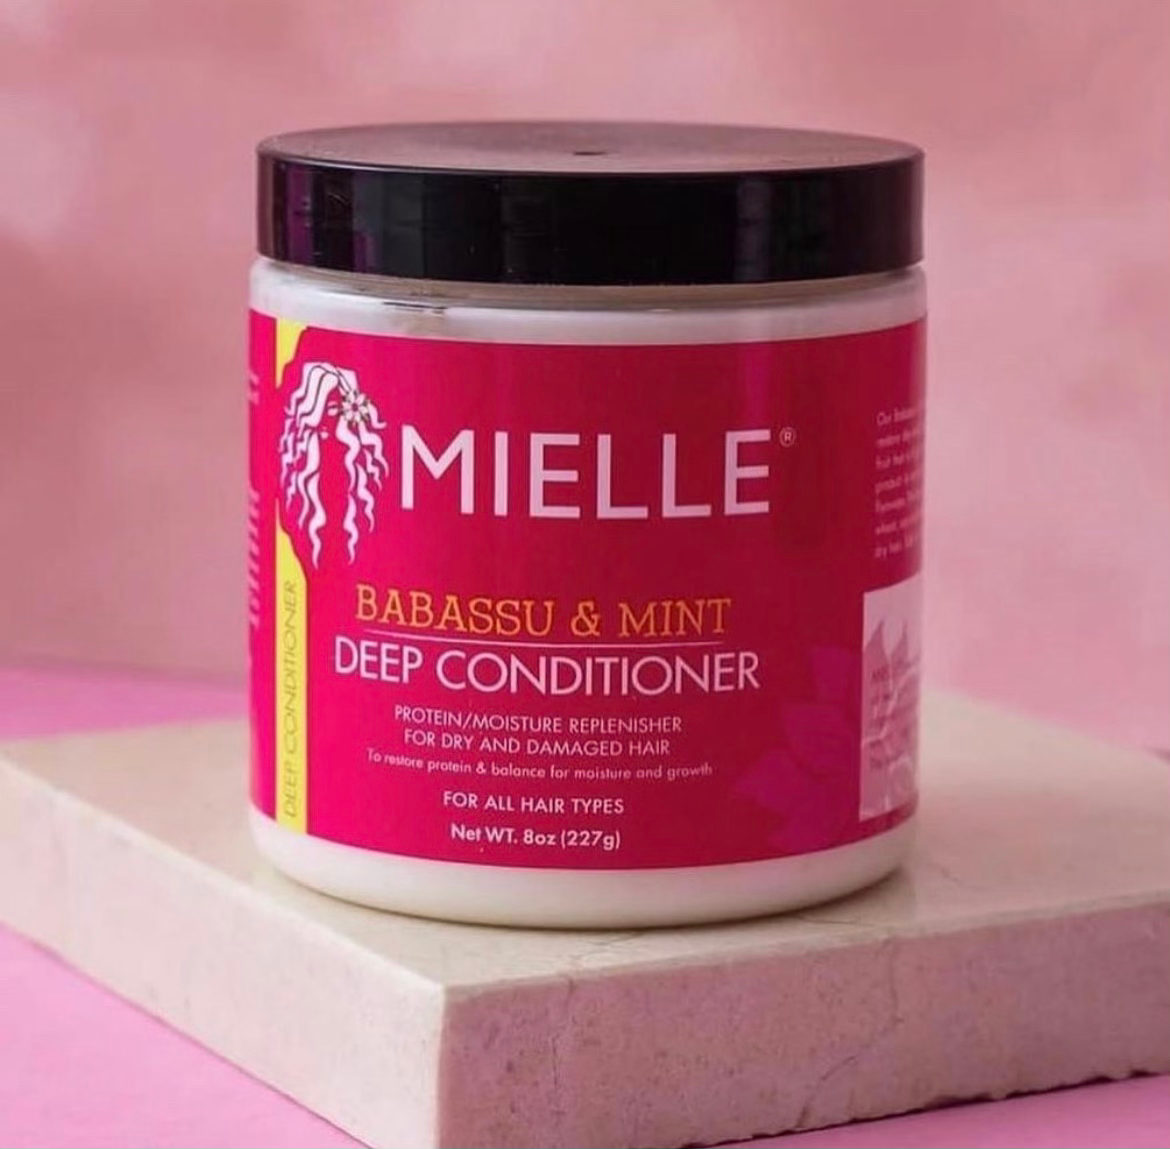 mielle hair prooducts 1